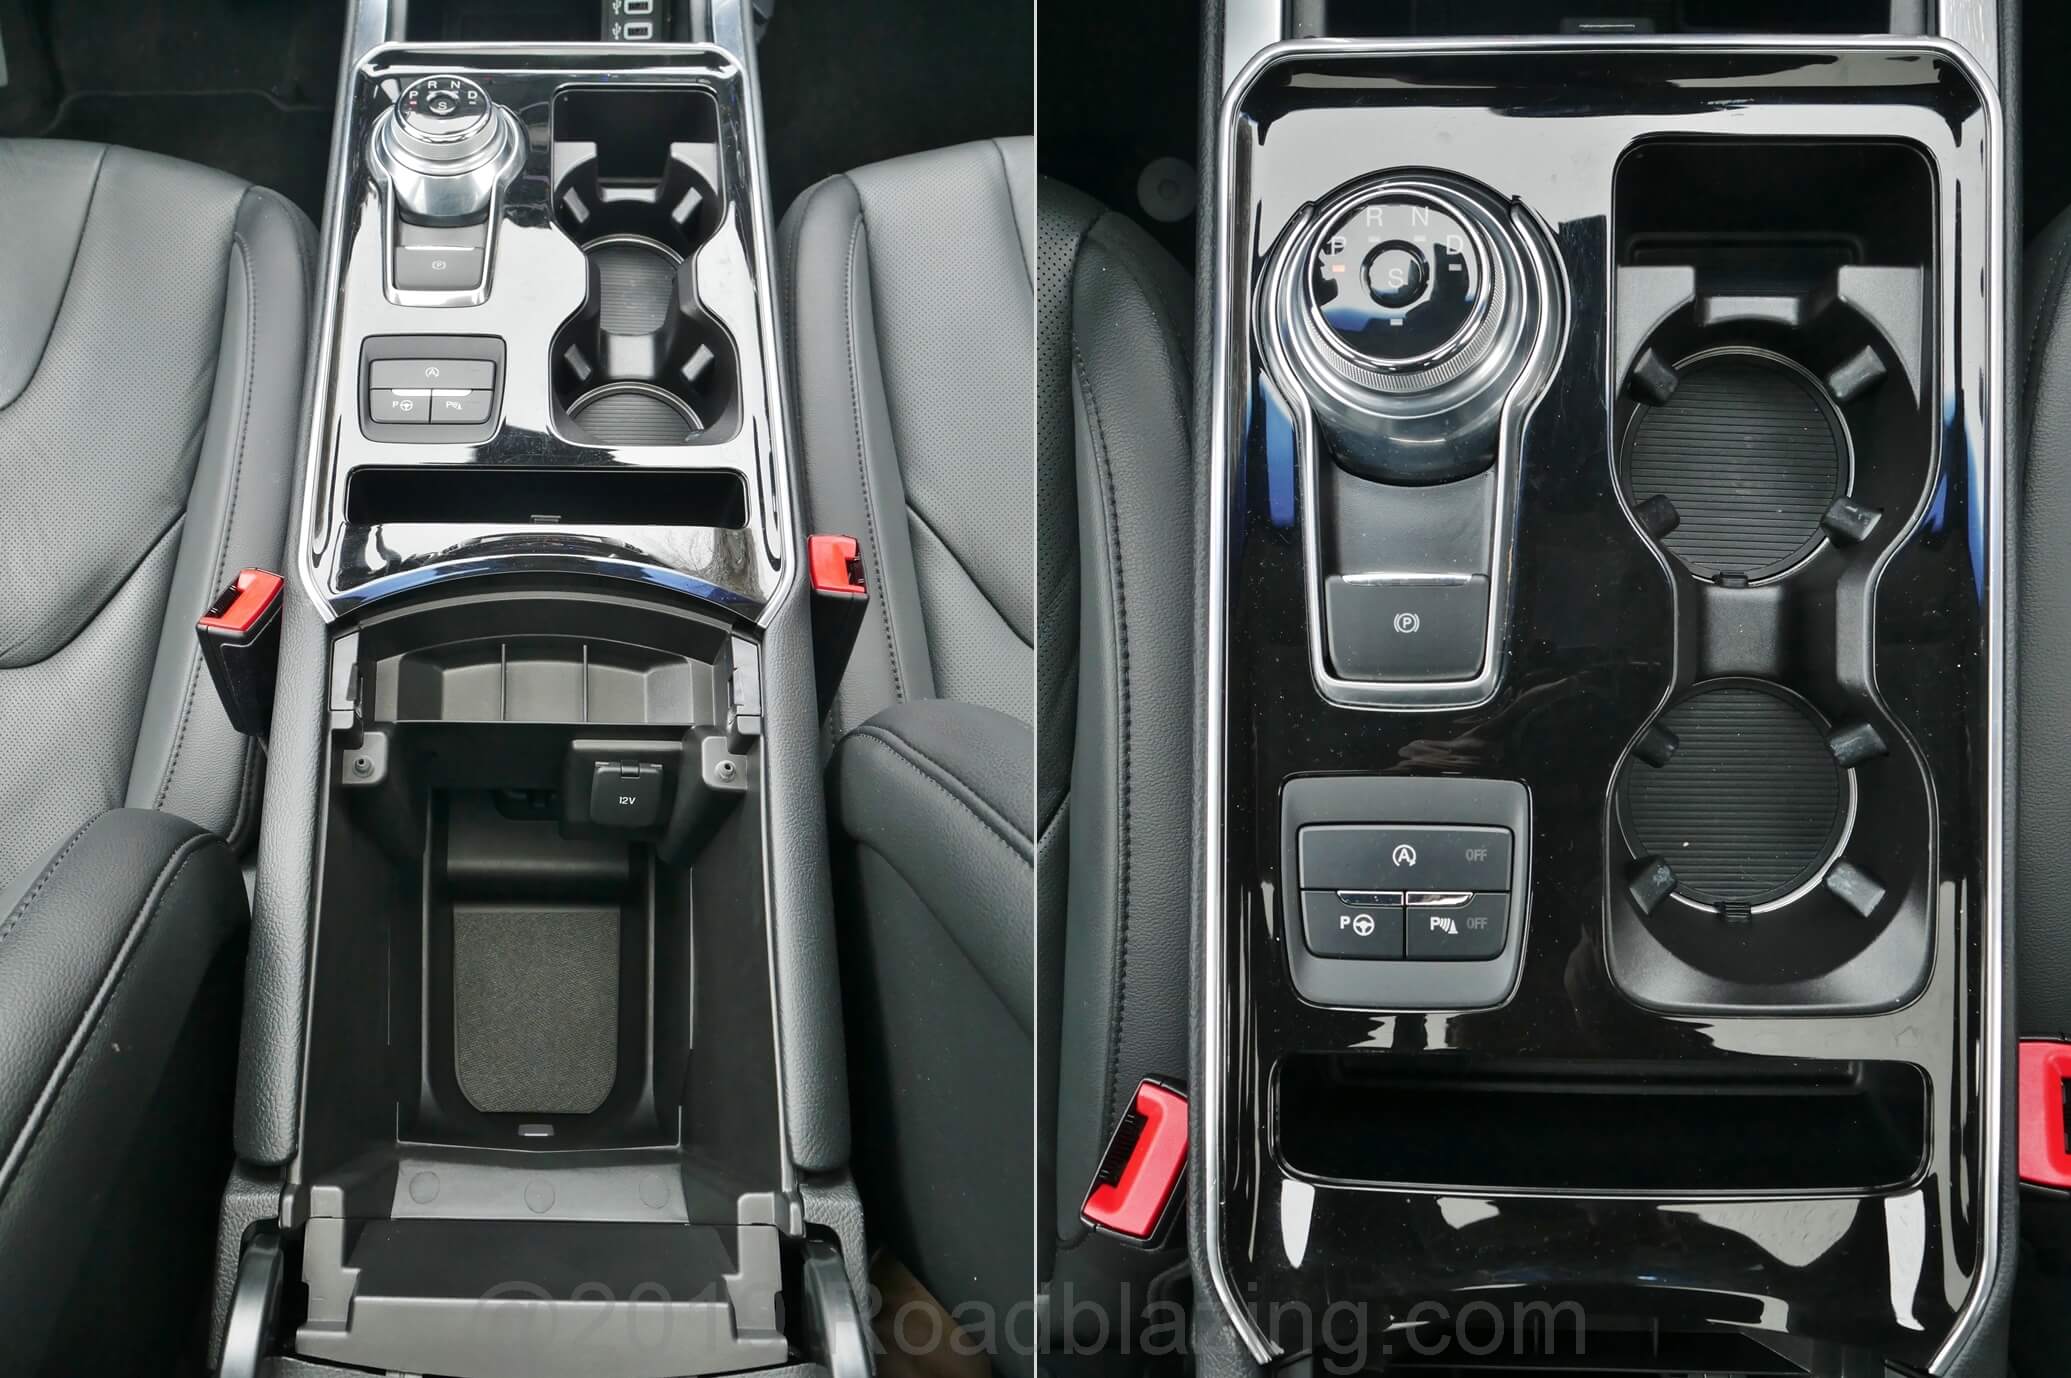 2019 Ford Edge Titanium AWD: Center console storage increases with adoption of rotary dial transmission selector